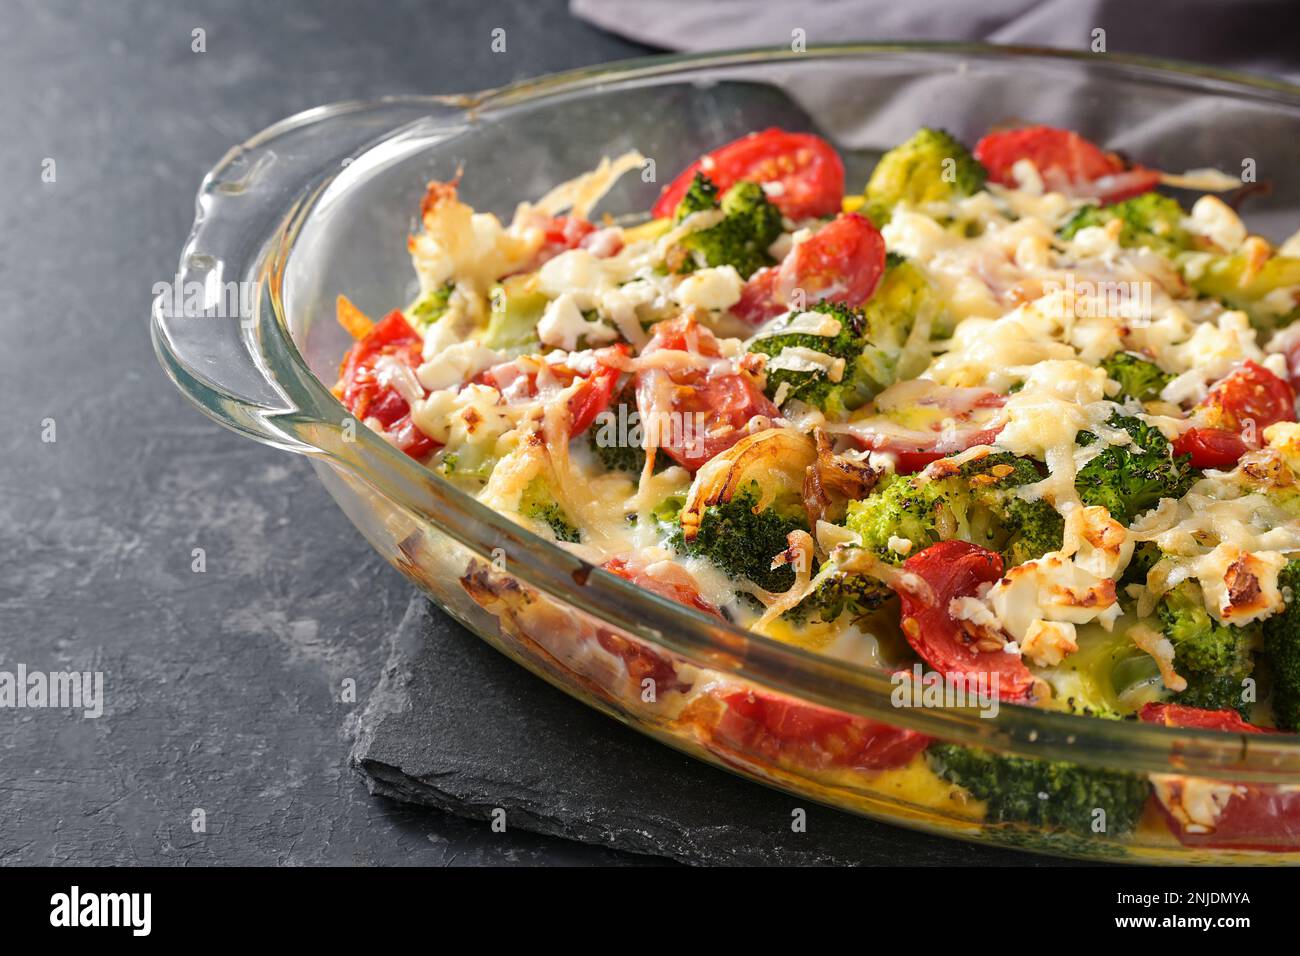 Vegetable dish from broccoli, tomatoes, onions, feta and cheese in a glass casserole on a gray slate table, copy space, selected focus, narrow depth o Stock Photo